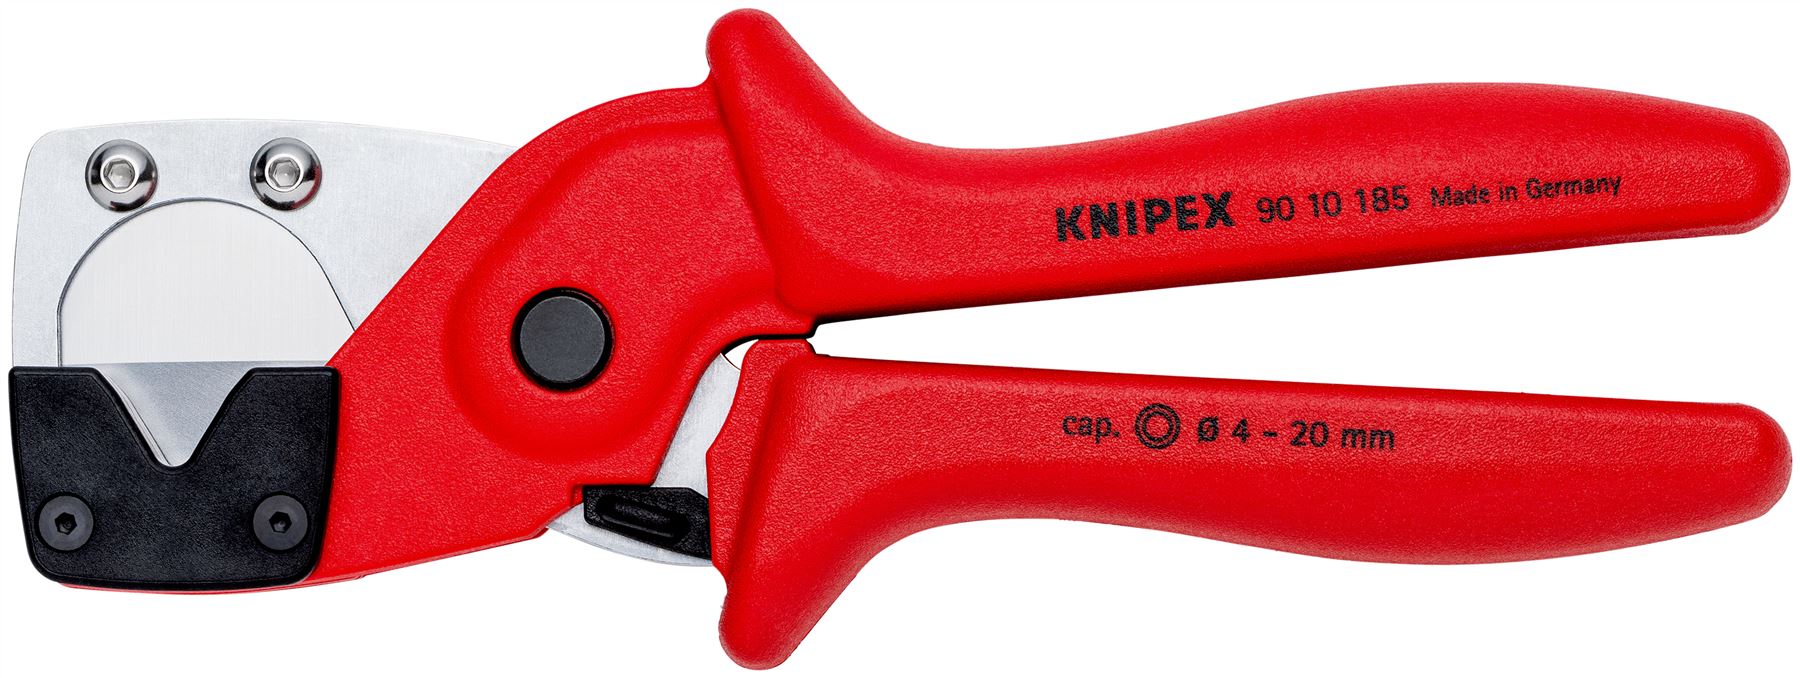 Knipex Pipe Cutters Cutting Pliers for Multilayer and Pnuematic Hoses 4-20mm Capacity 90 10 185